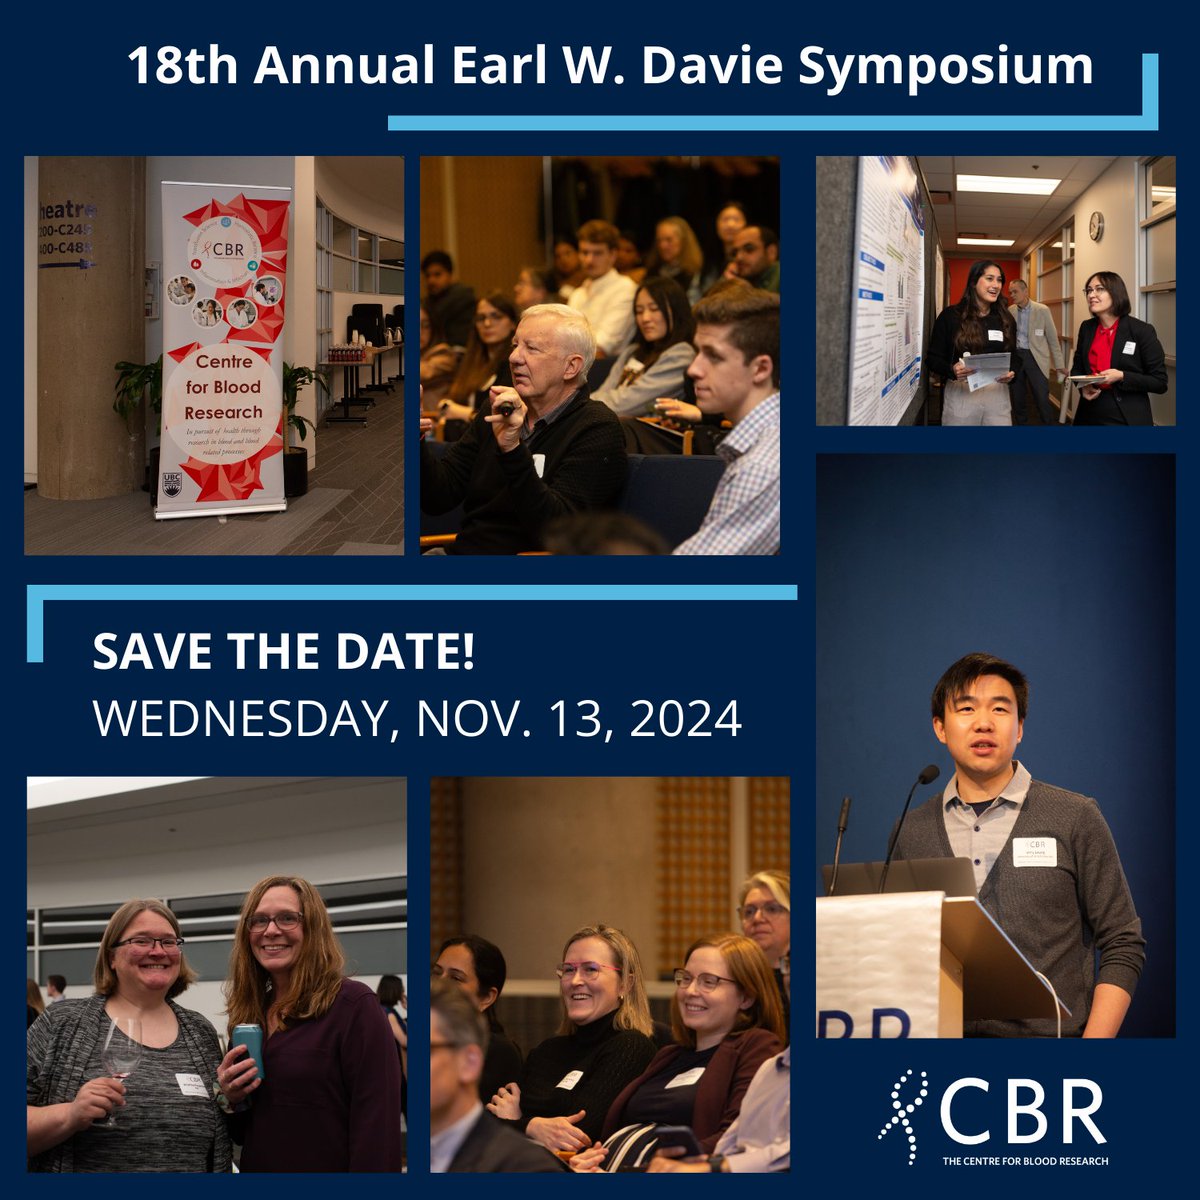 SAVE THE DATE! 📅 The 18th Annual Earl W. Davie Symposium is set for November 13, 2024. The speaker line up is available on our website! Stay tuned for more details. #research #science #symposium